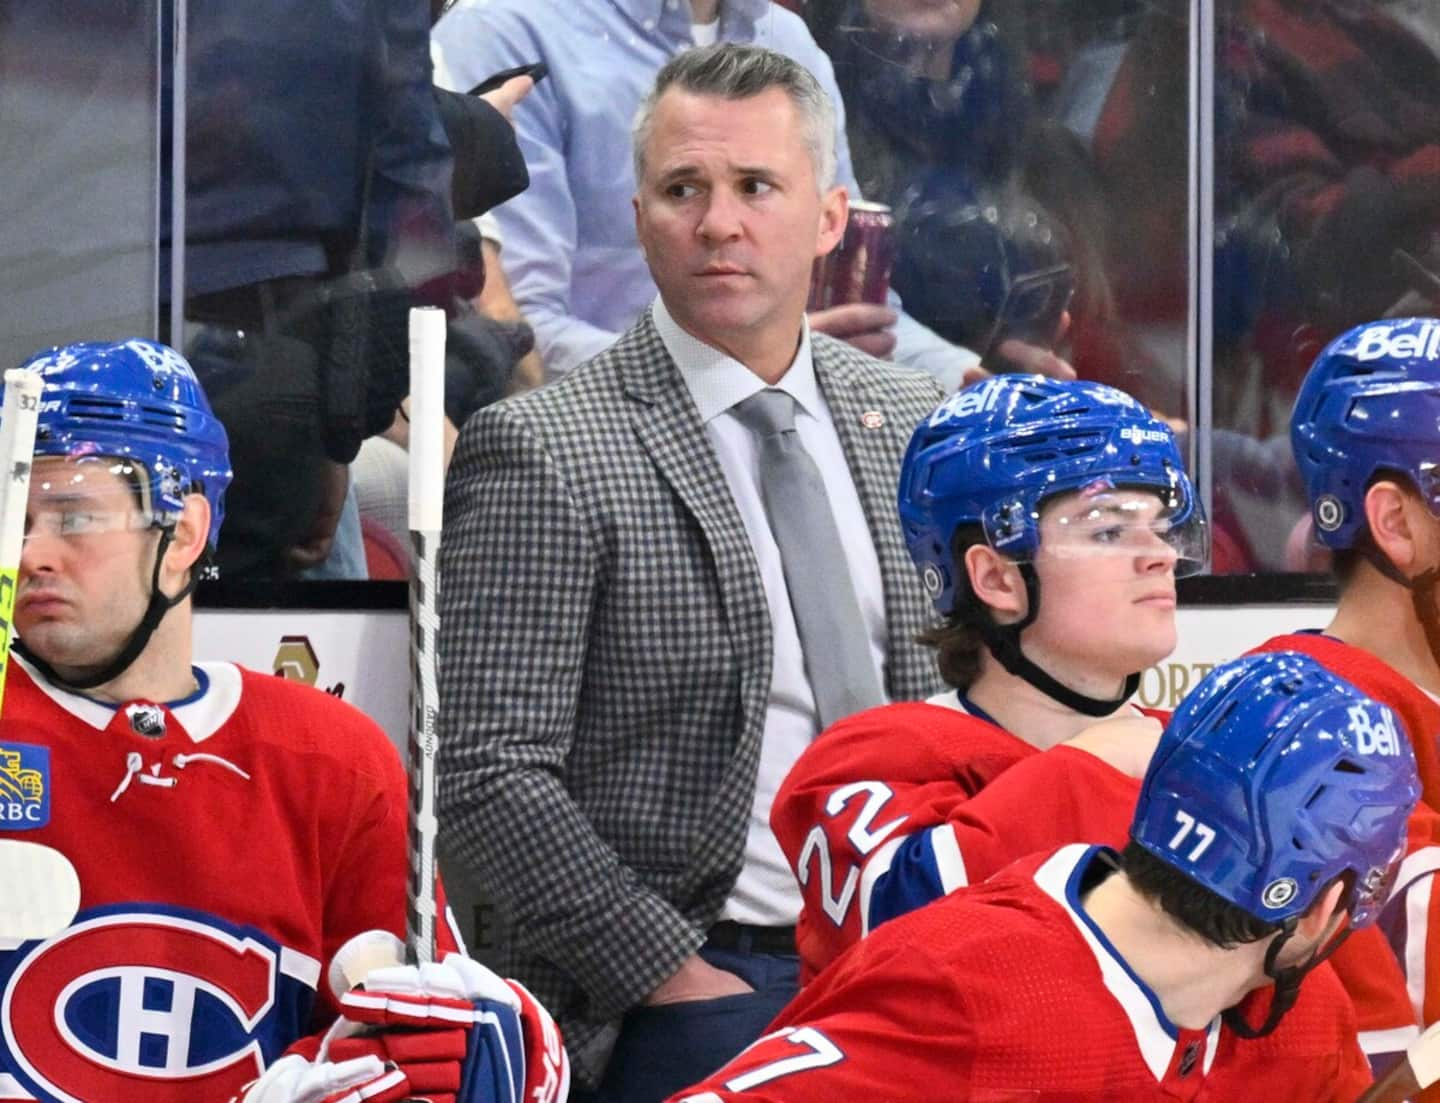 Martin St-Louis does not say the bottom of his thought